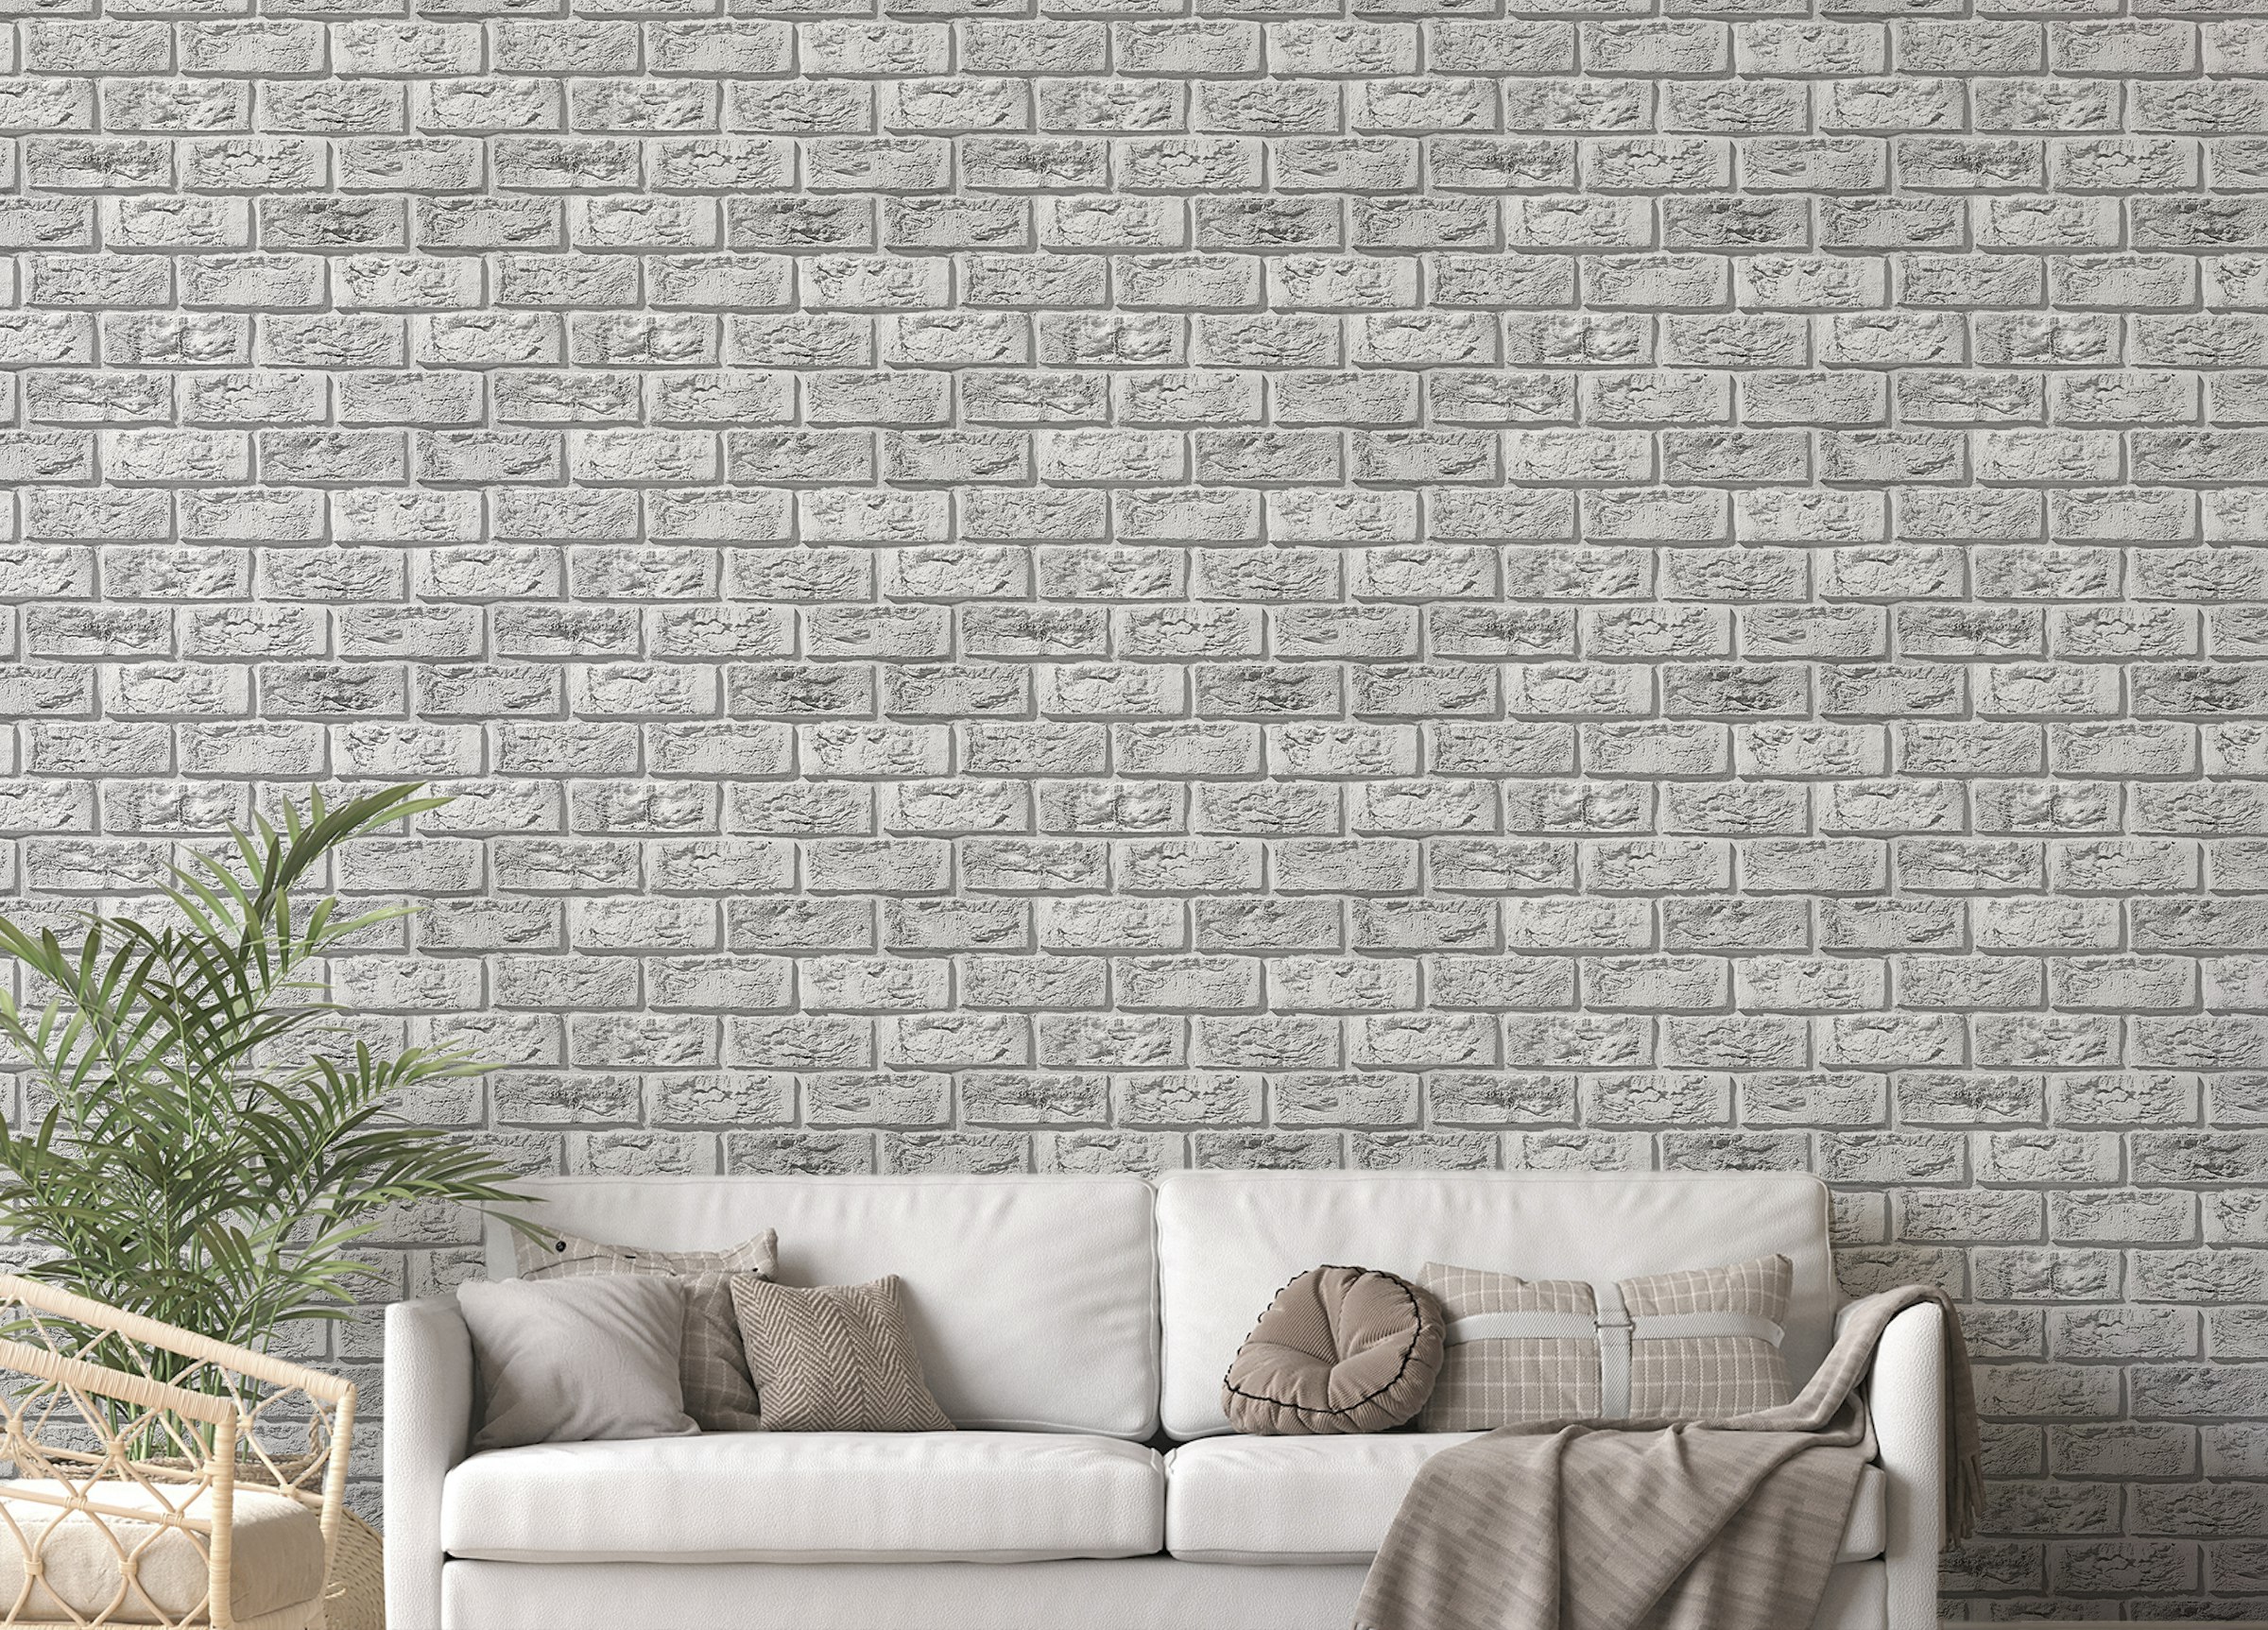 Peel and Stick Rustic Vintage White Color Brick Wallpaper For Walls